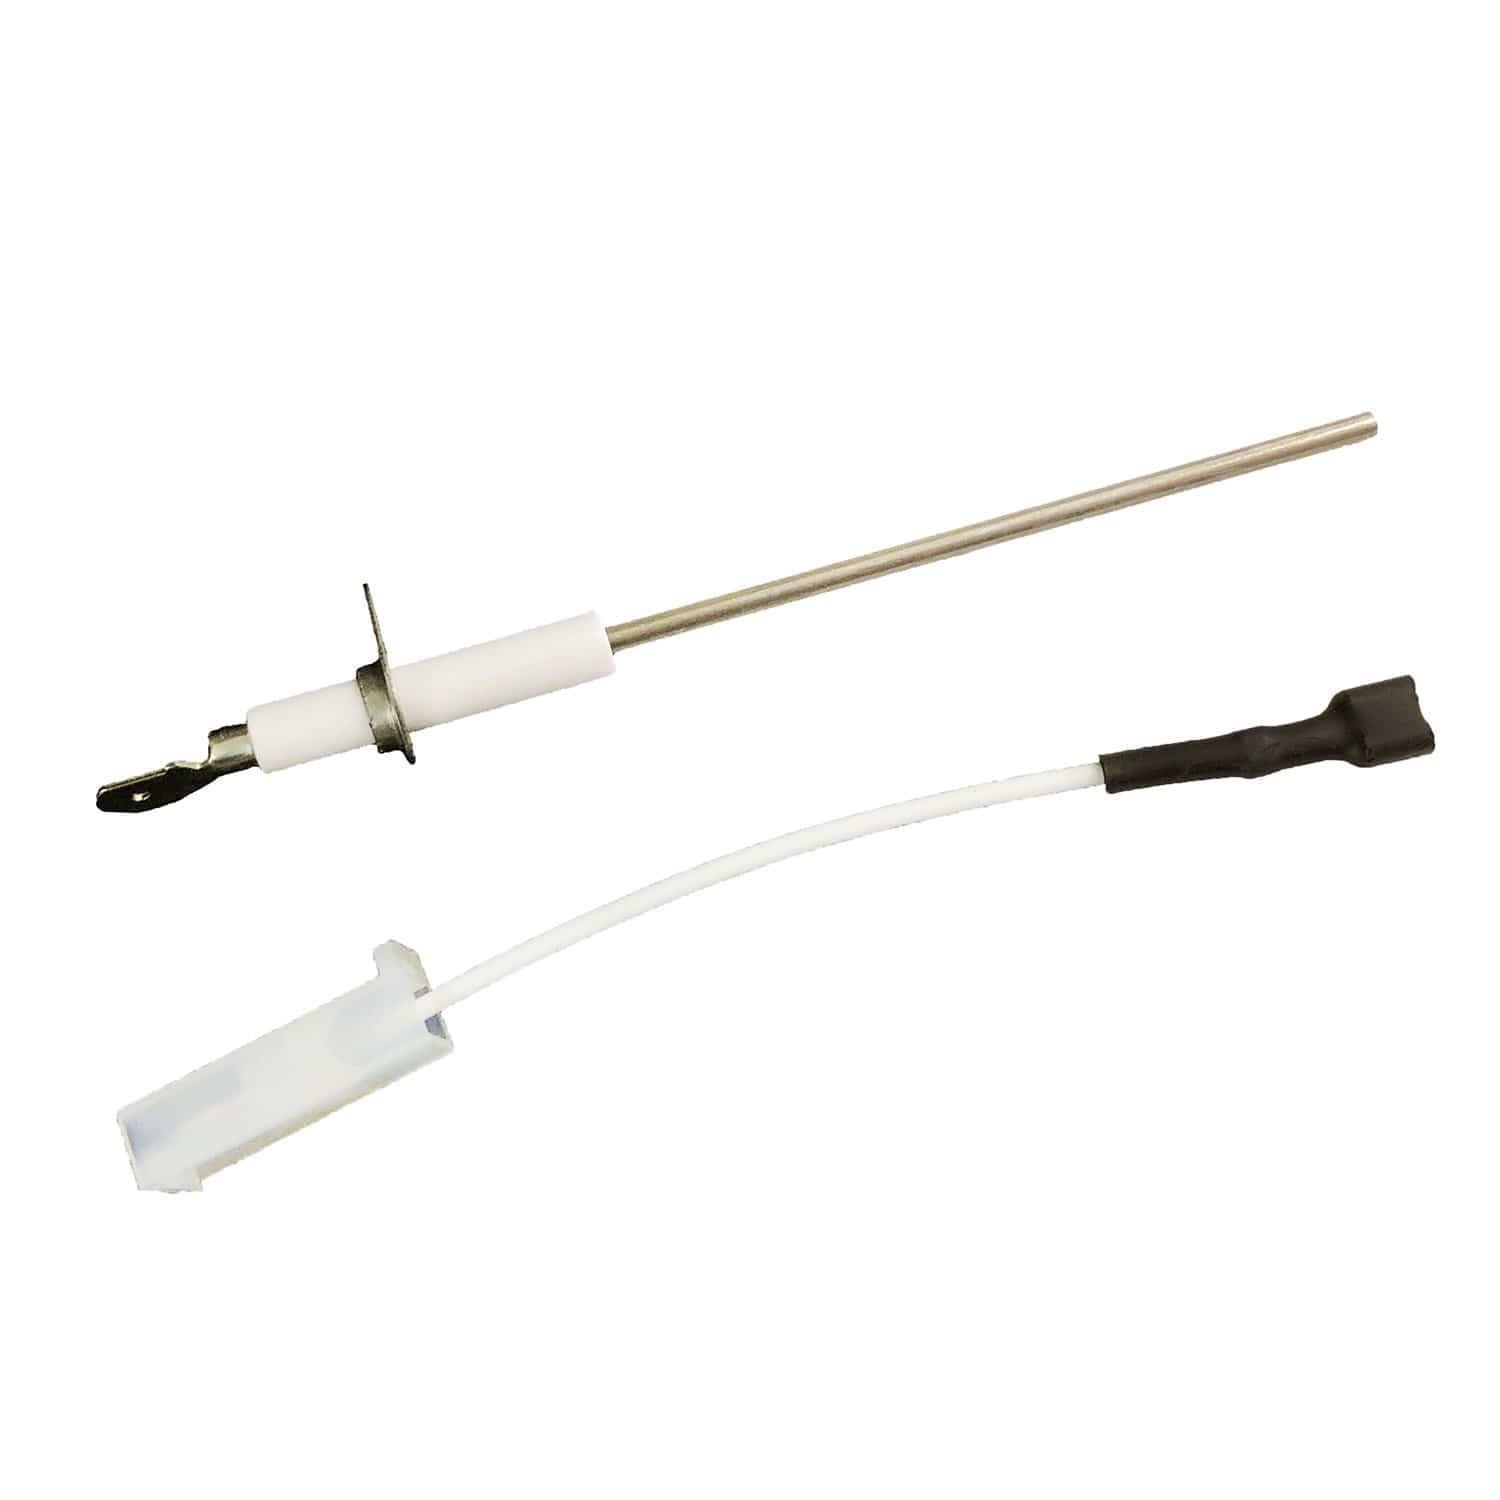 Packard PFS013 Flame Sensor with Ceramic Insulator, Replaces Carrier